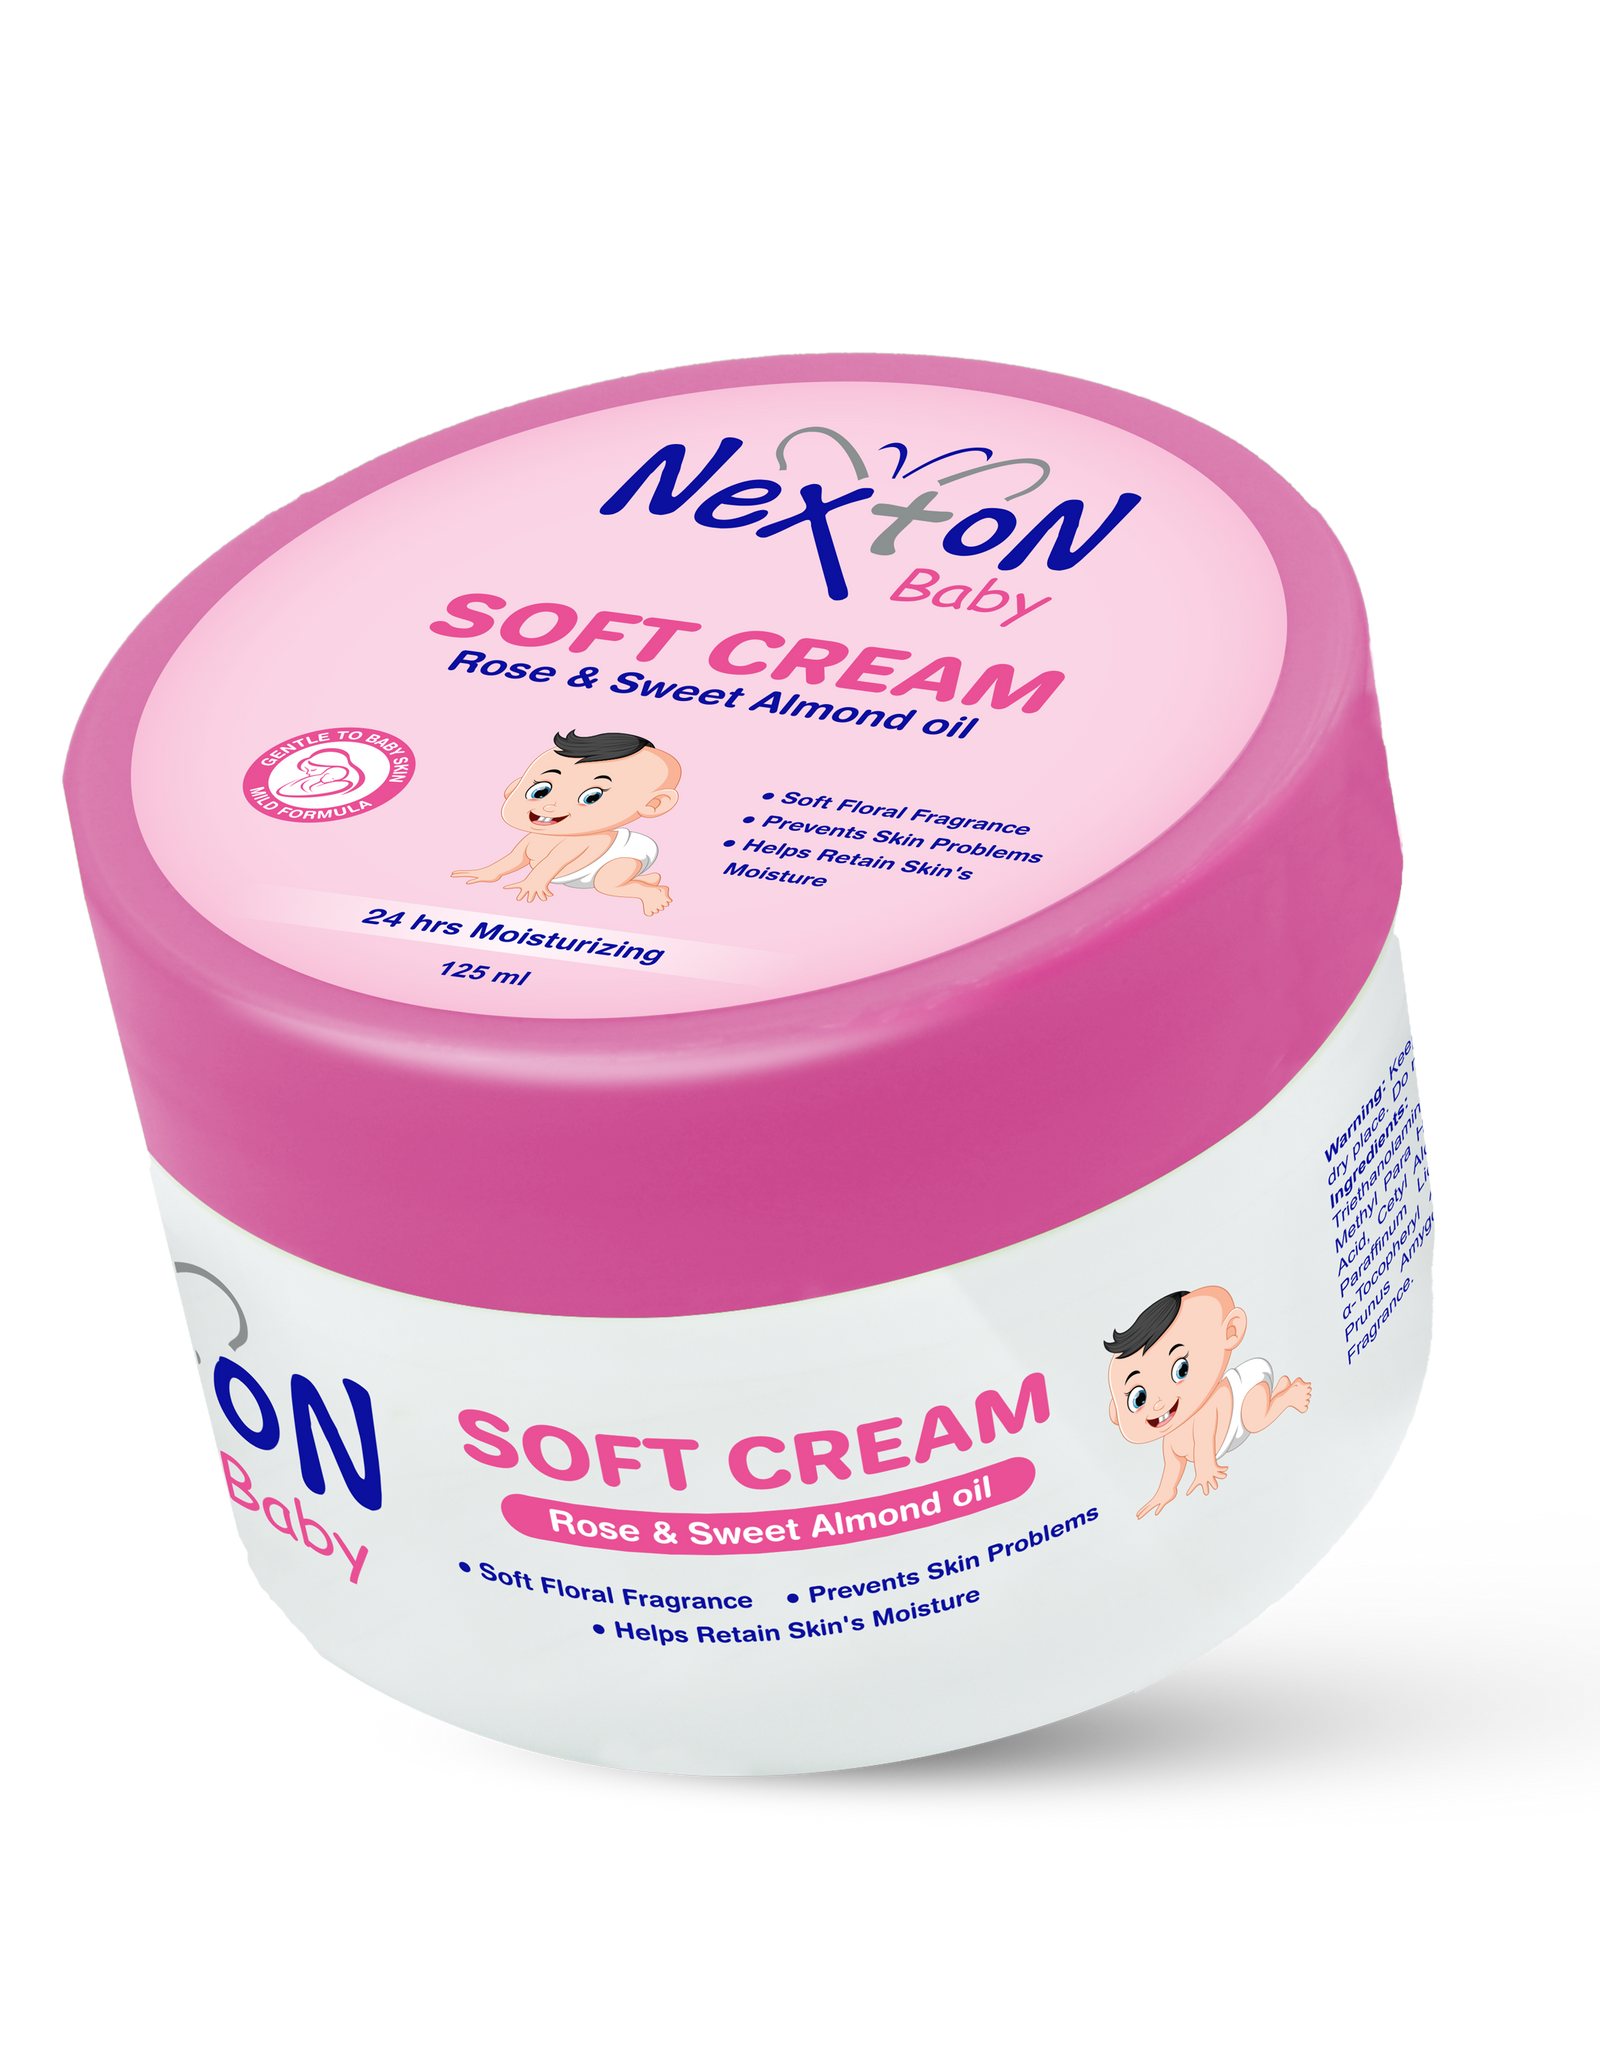 NEXTON BABY SOFT CREAM ROSE AND SWEET ALMOND OIL